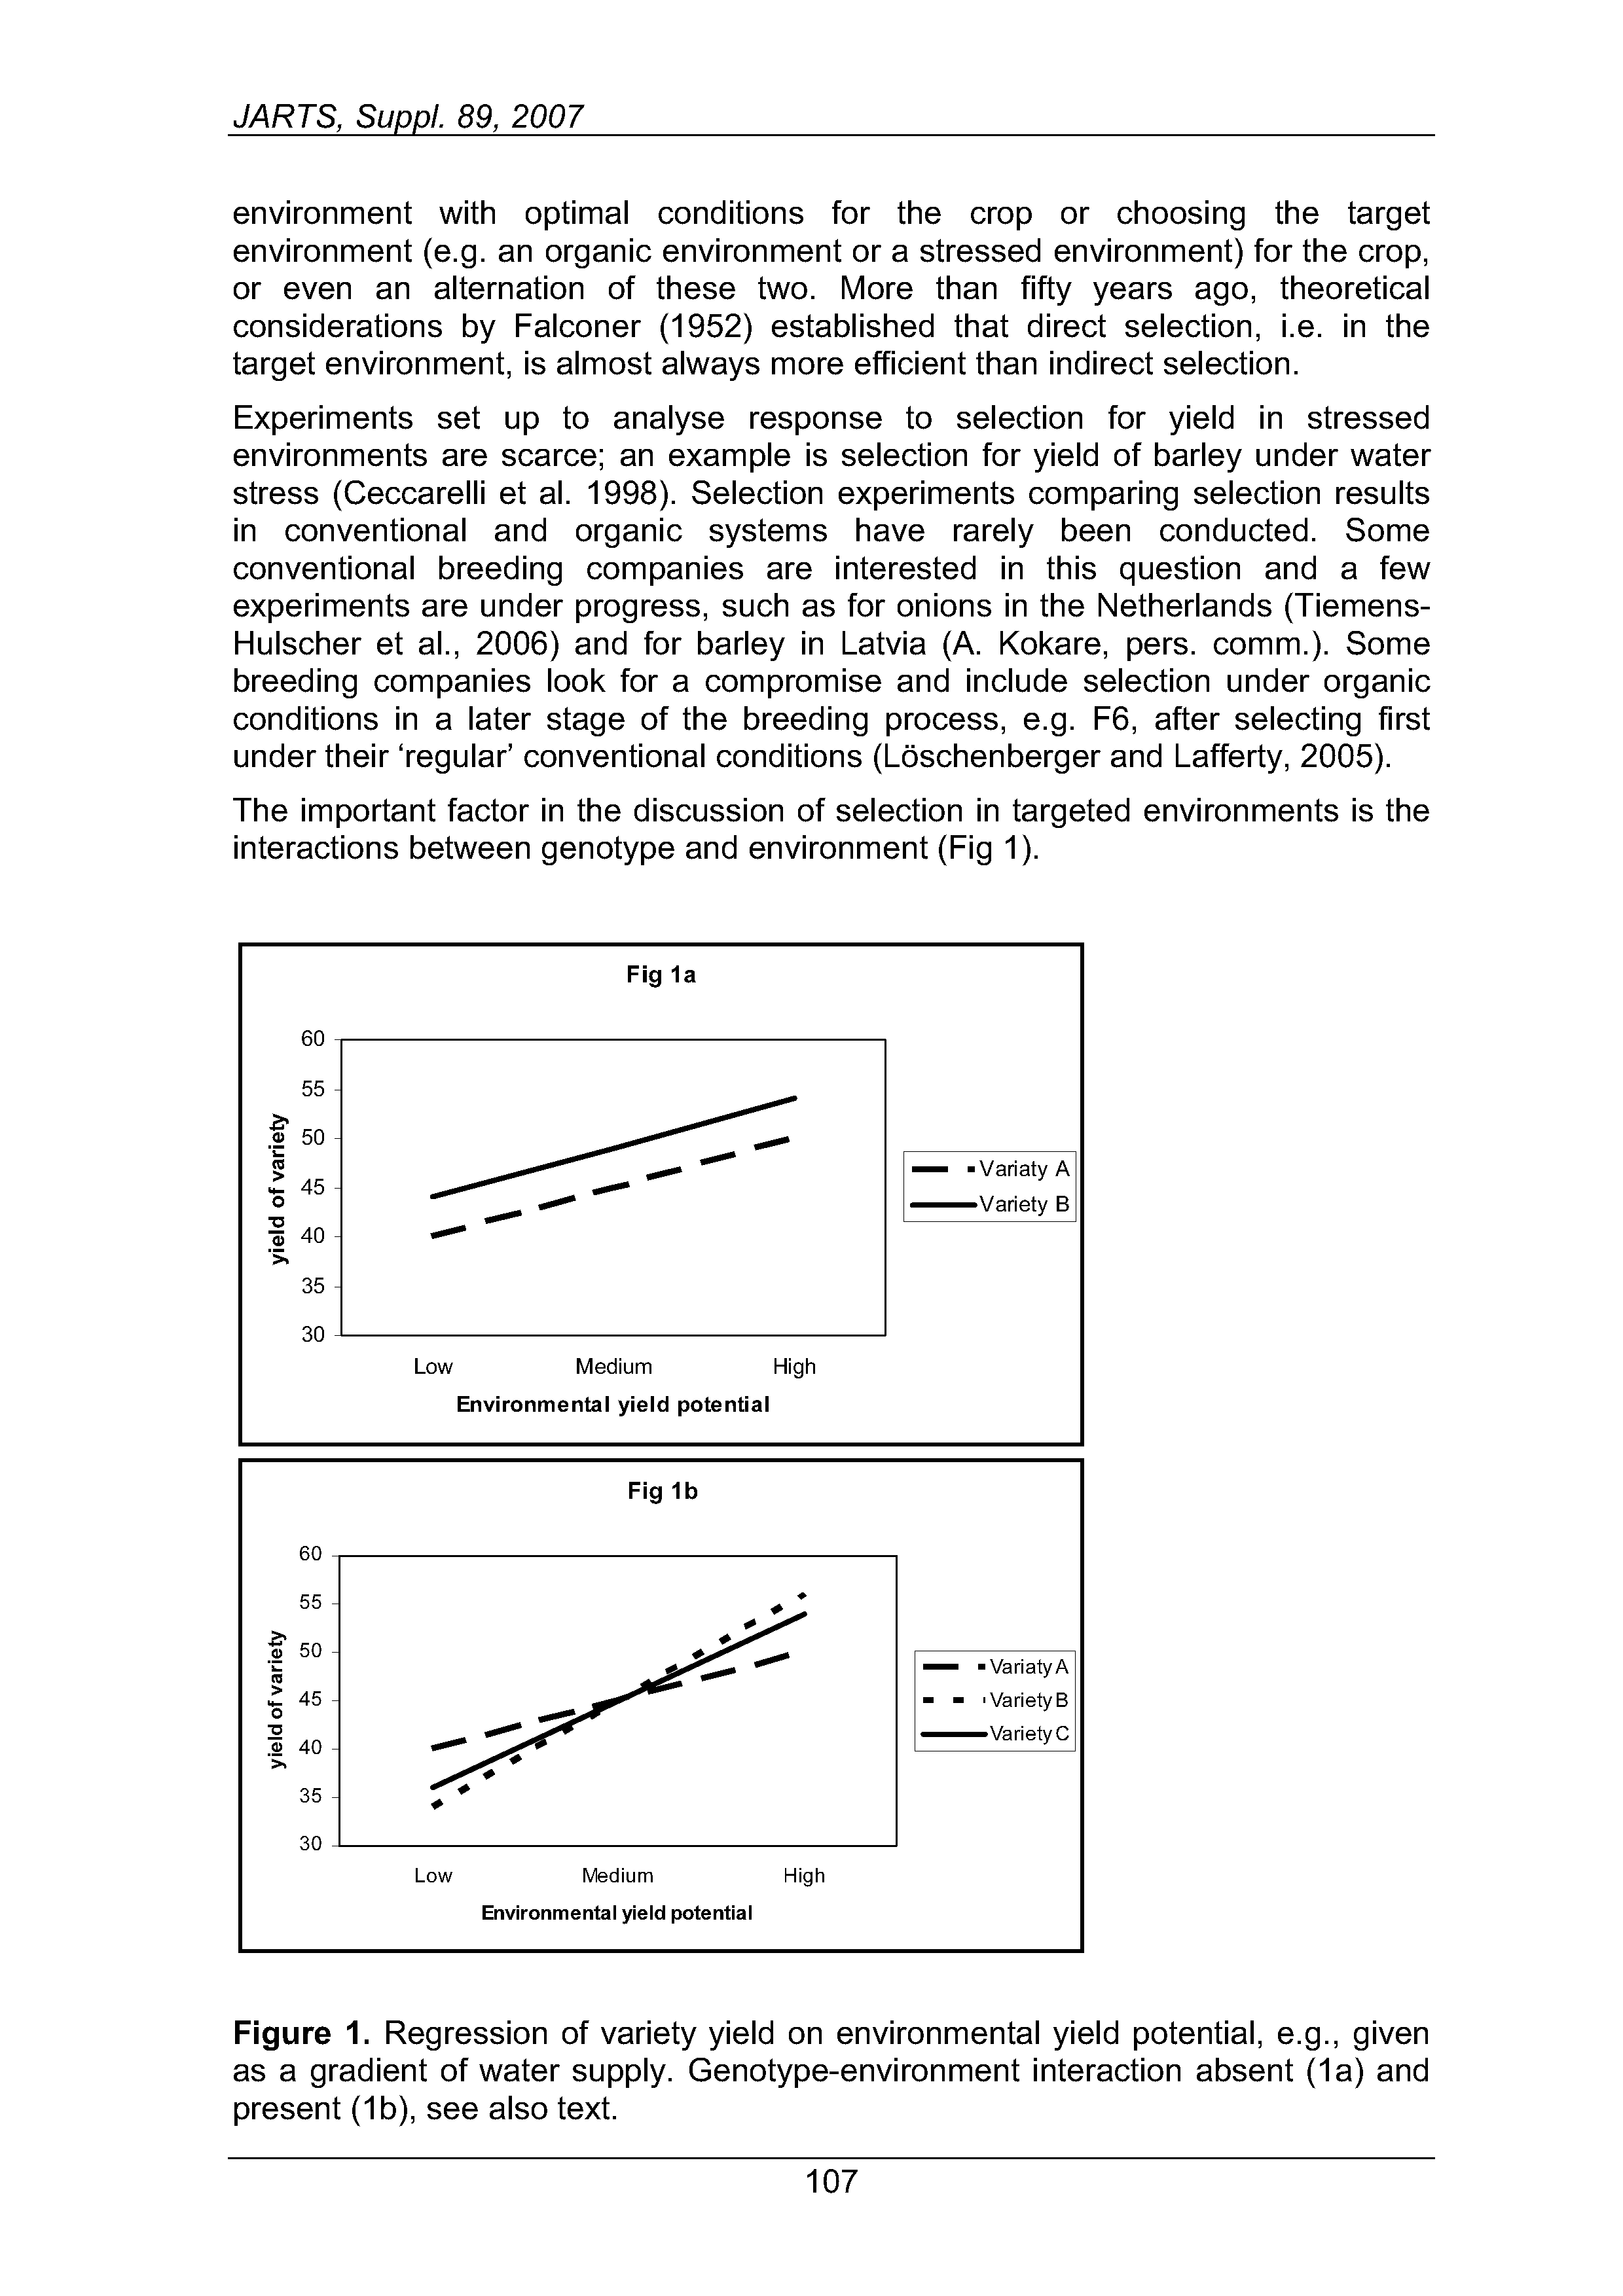 Figure 1. Regression of variety yield on environmental yield potential, e.g., given as a gradient of water supply. Genotype-environment interaction absent (1a) and present (1b), see also text.